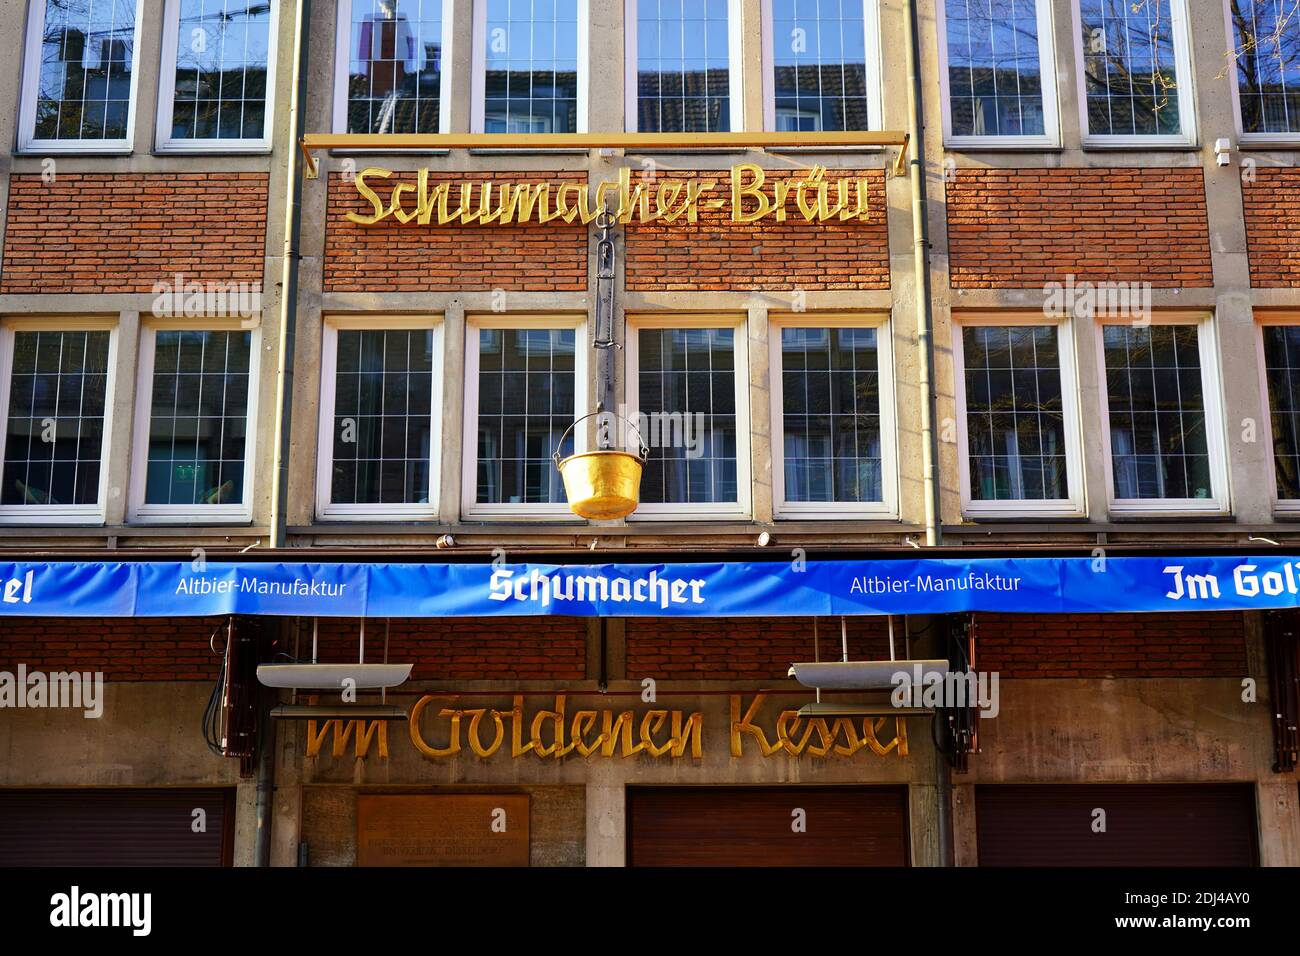 Exterior of the legendary brewery 'Schumacher Bräu' in Old Town Düsseldorf. This place is family-owned and has a tradition of 110 years. Stock Photo